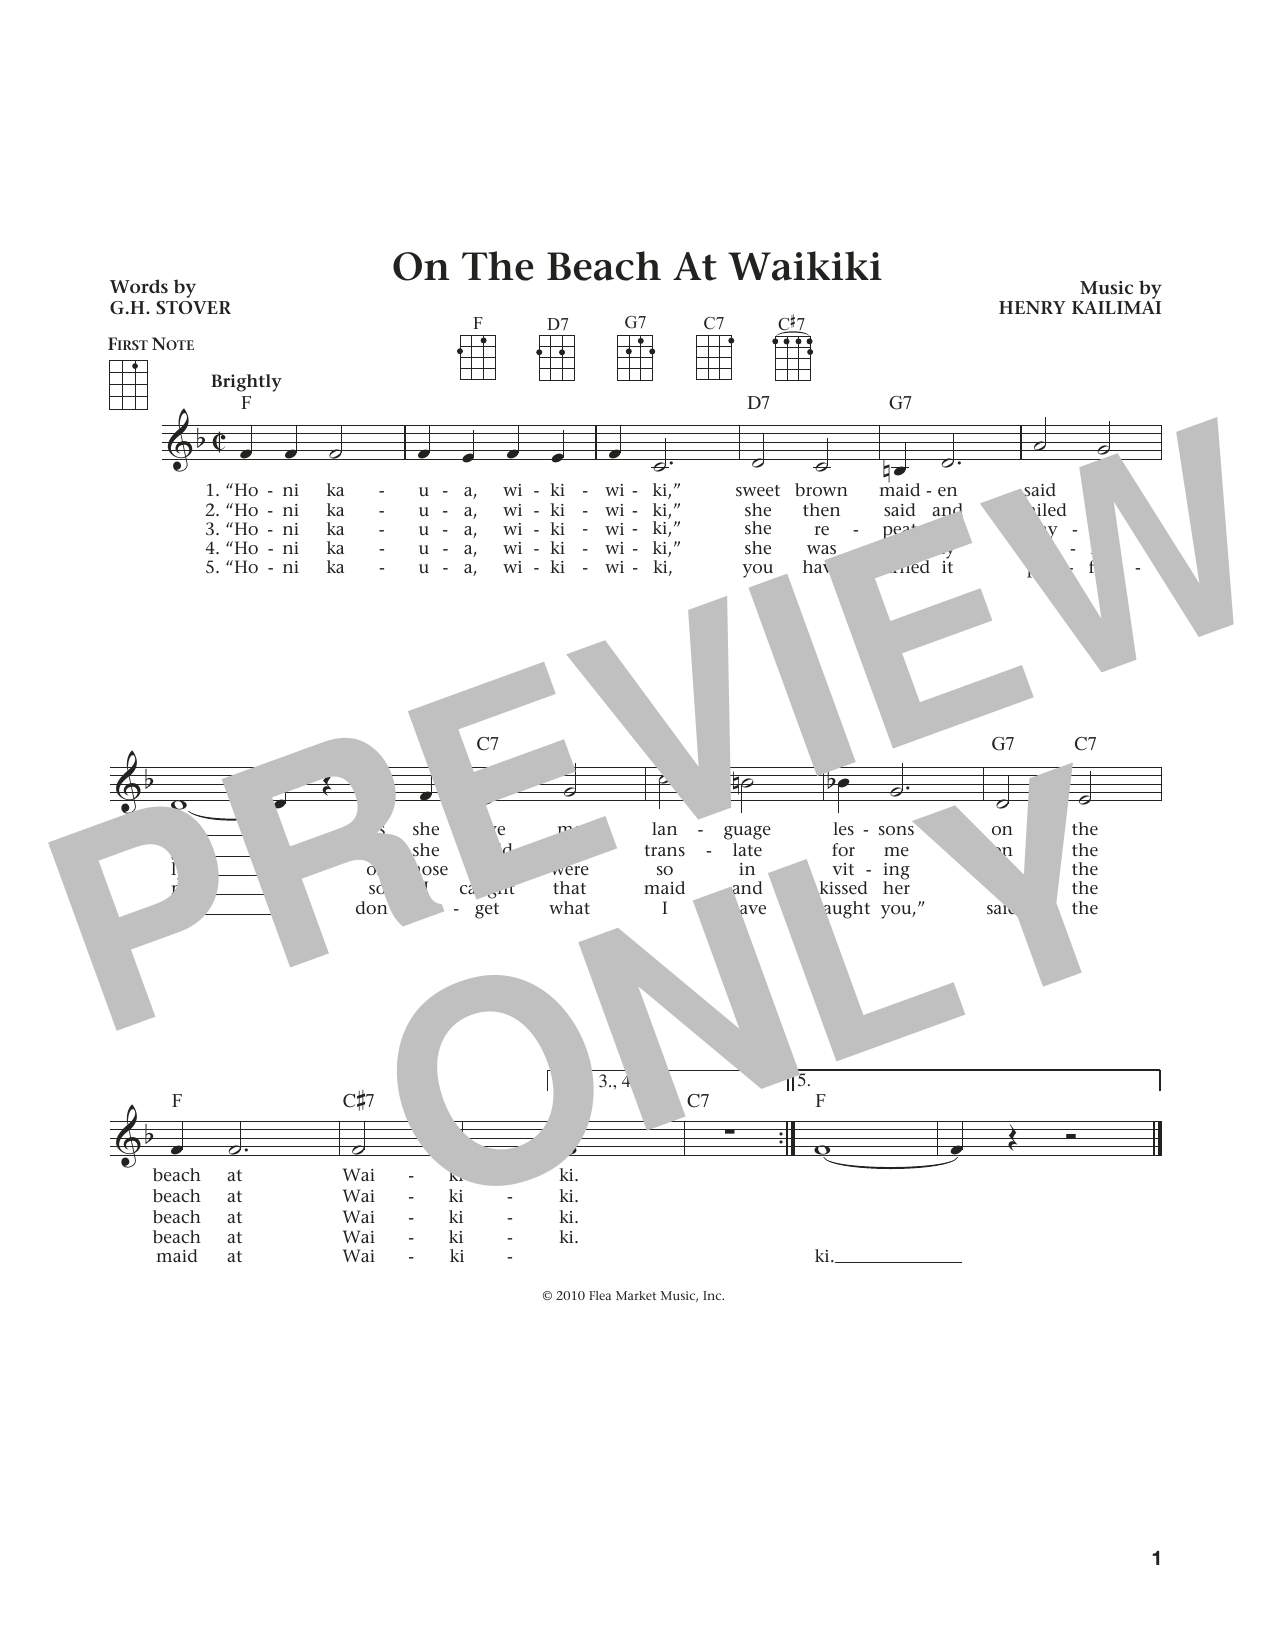 Download G.H. Stover On The Beach At Waikiki (from The Daily Sheet Music